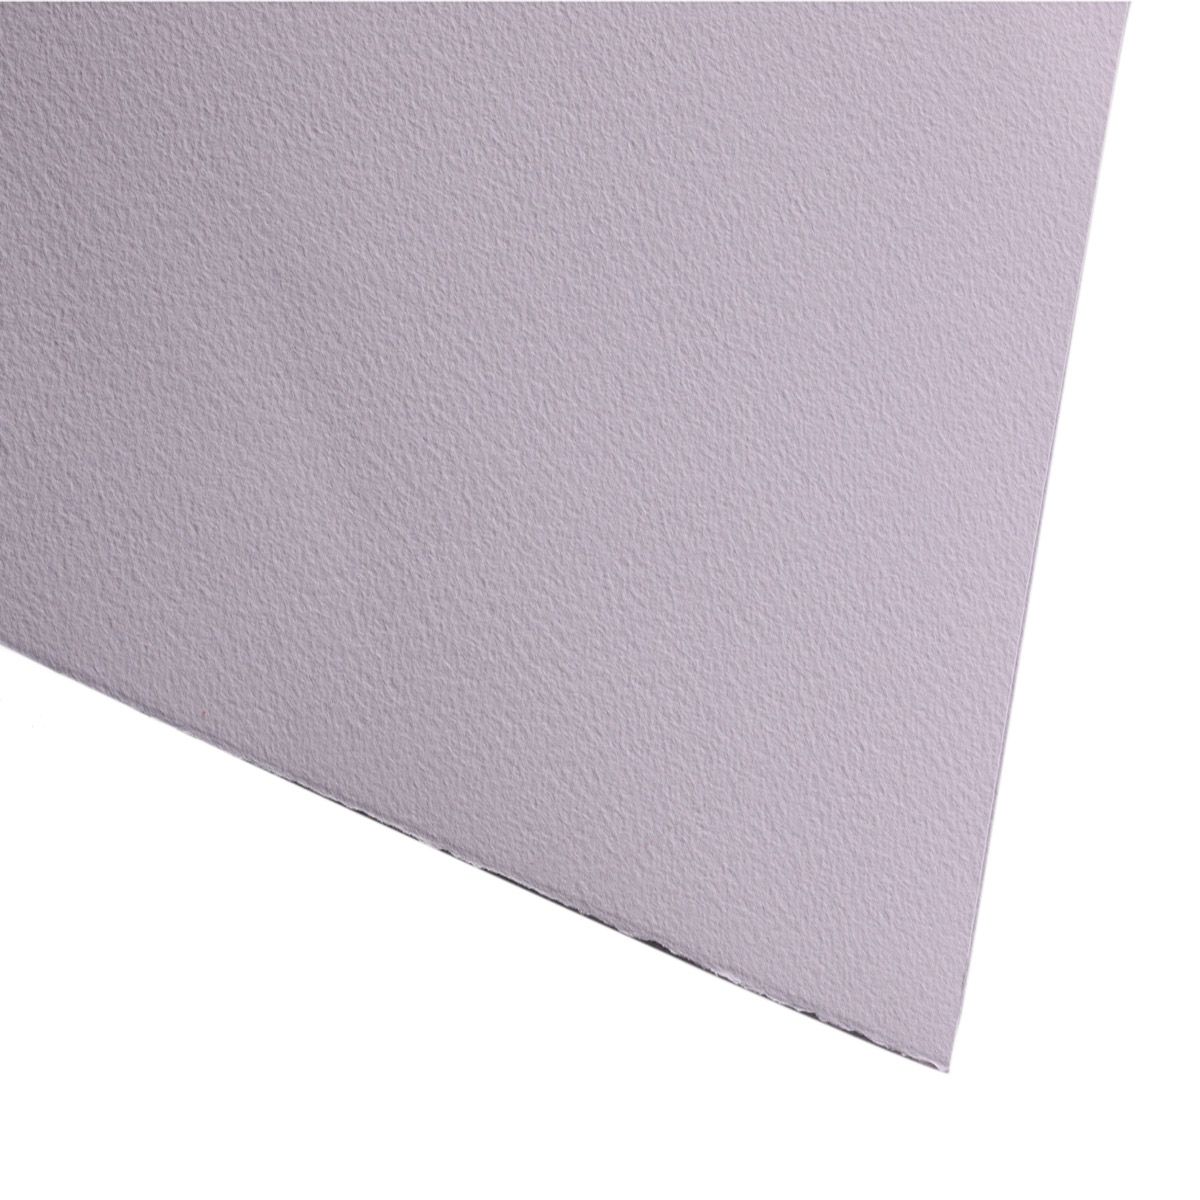 Fabriano Cromia Paper Sheet Pale Gray 19.6